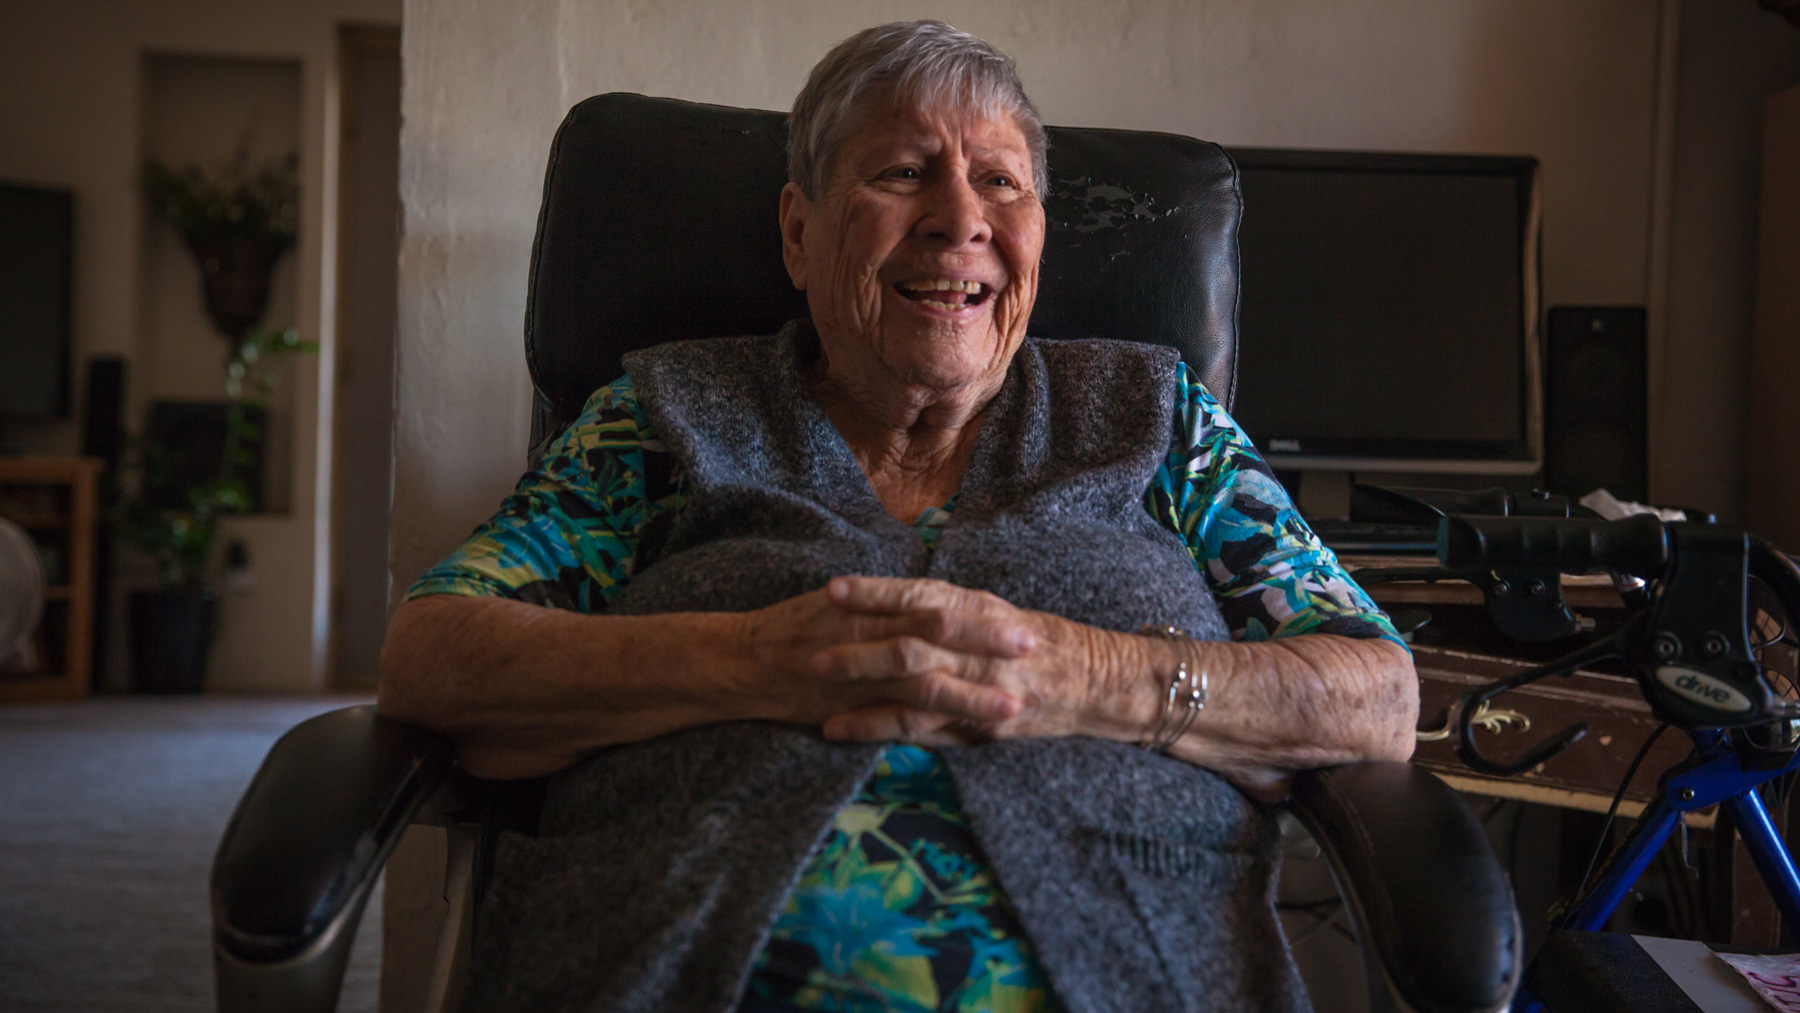 “We’re country people; we don’t cry about it,” Saturnina Mendoza, 87, said about the water in La Union, N.M., testing positive for arsenic levels above the EPA limit. (Maria Esquinca/News21)